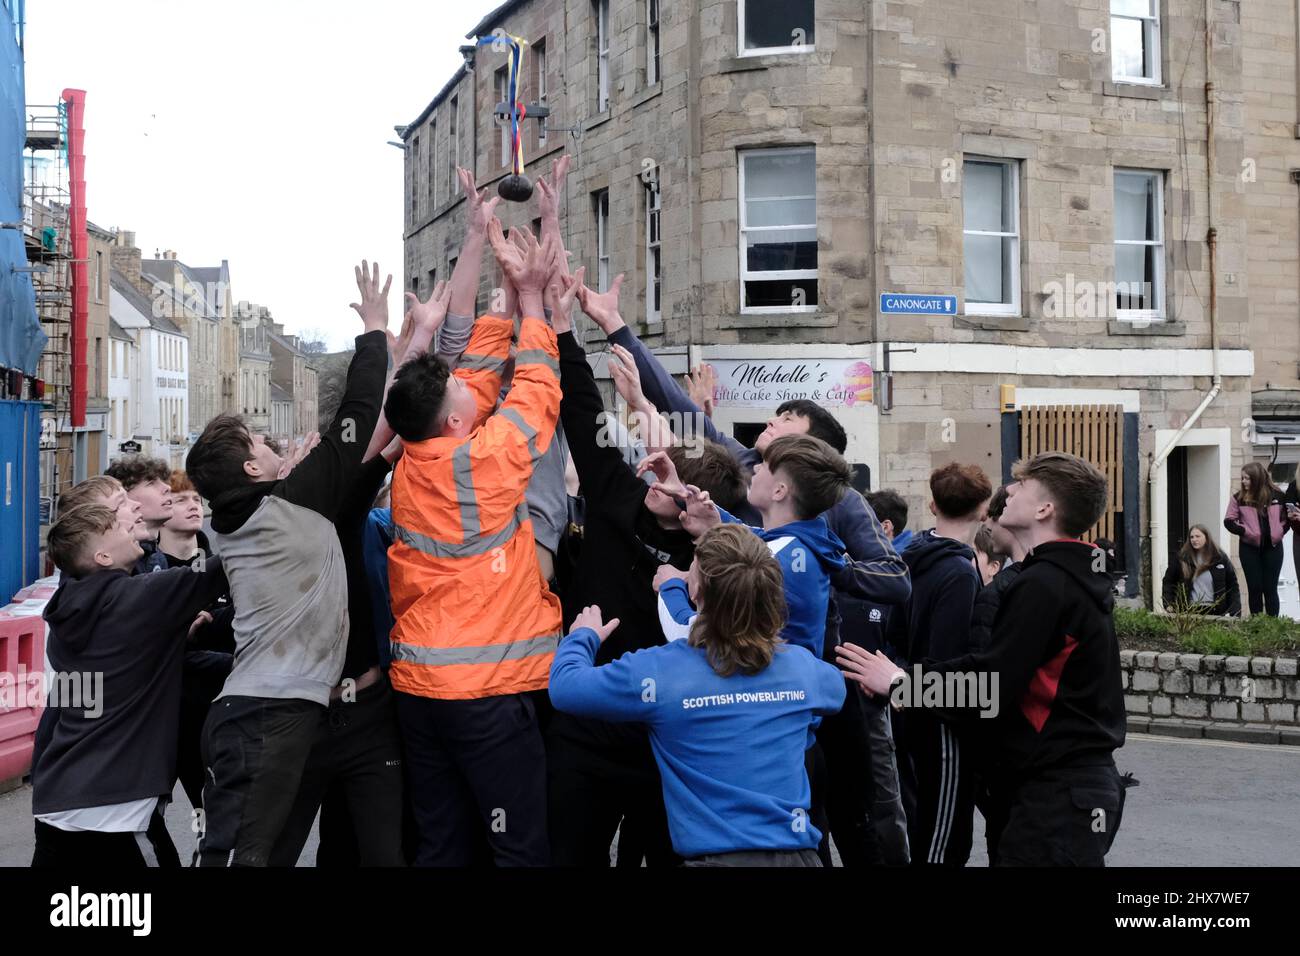 Jedburgh, Thursday 10 March 2022. A group of youths challenge for the 'Schule Ba' the first to be 'hailed' at the start of the annual 'Fastern Eve Handba' event in Jedburgh's High Street in the Scottish Borders on March 10, 2022 in Jedburgh, Scotland. The annual event, which started in the 1700's, takes place today and involves two teams, the Uppies (residents from the higher part of Jedburgh) and the Doonies (residents from the lower part of Jedburgh) getting the ball to either the top or bottom of the town. The ball, which is made of leather, stuffed with straw and decorated with ribbons is Stock Photo